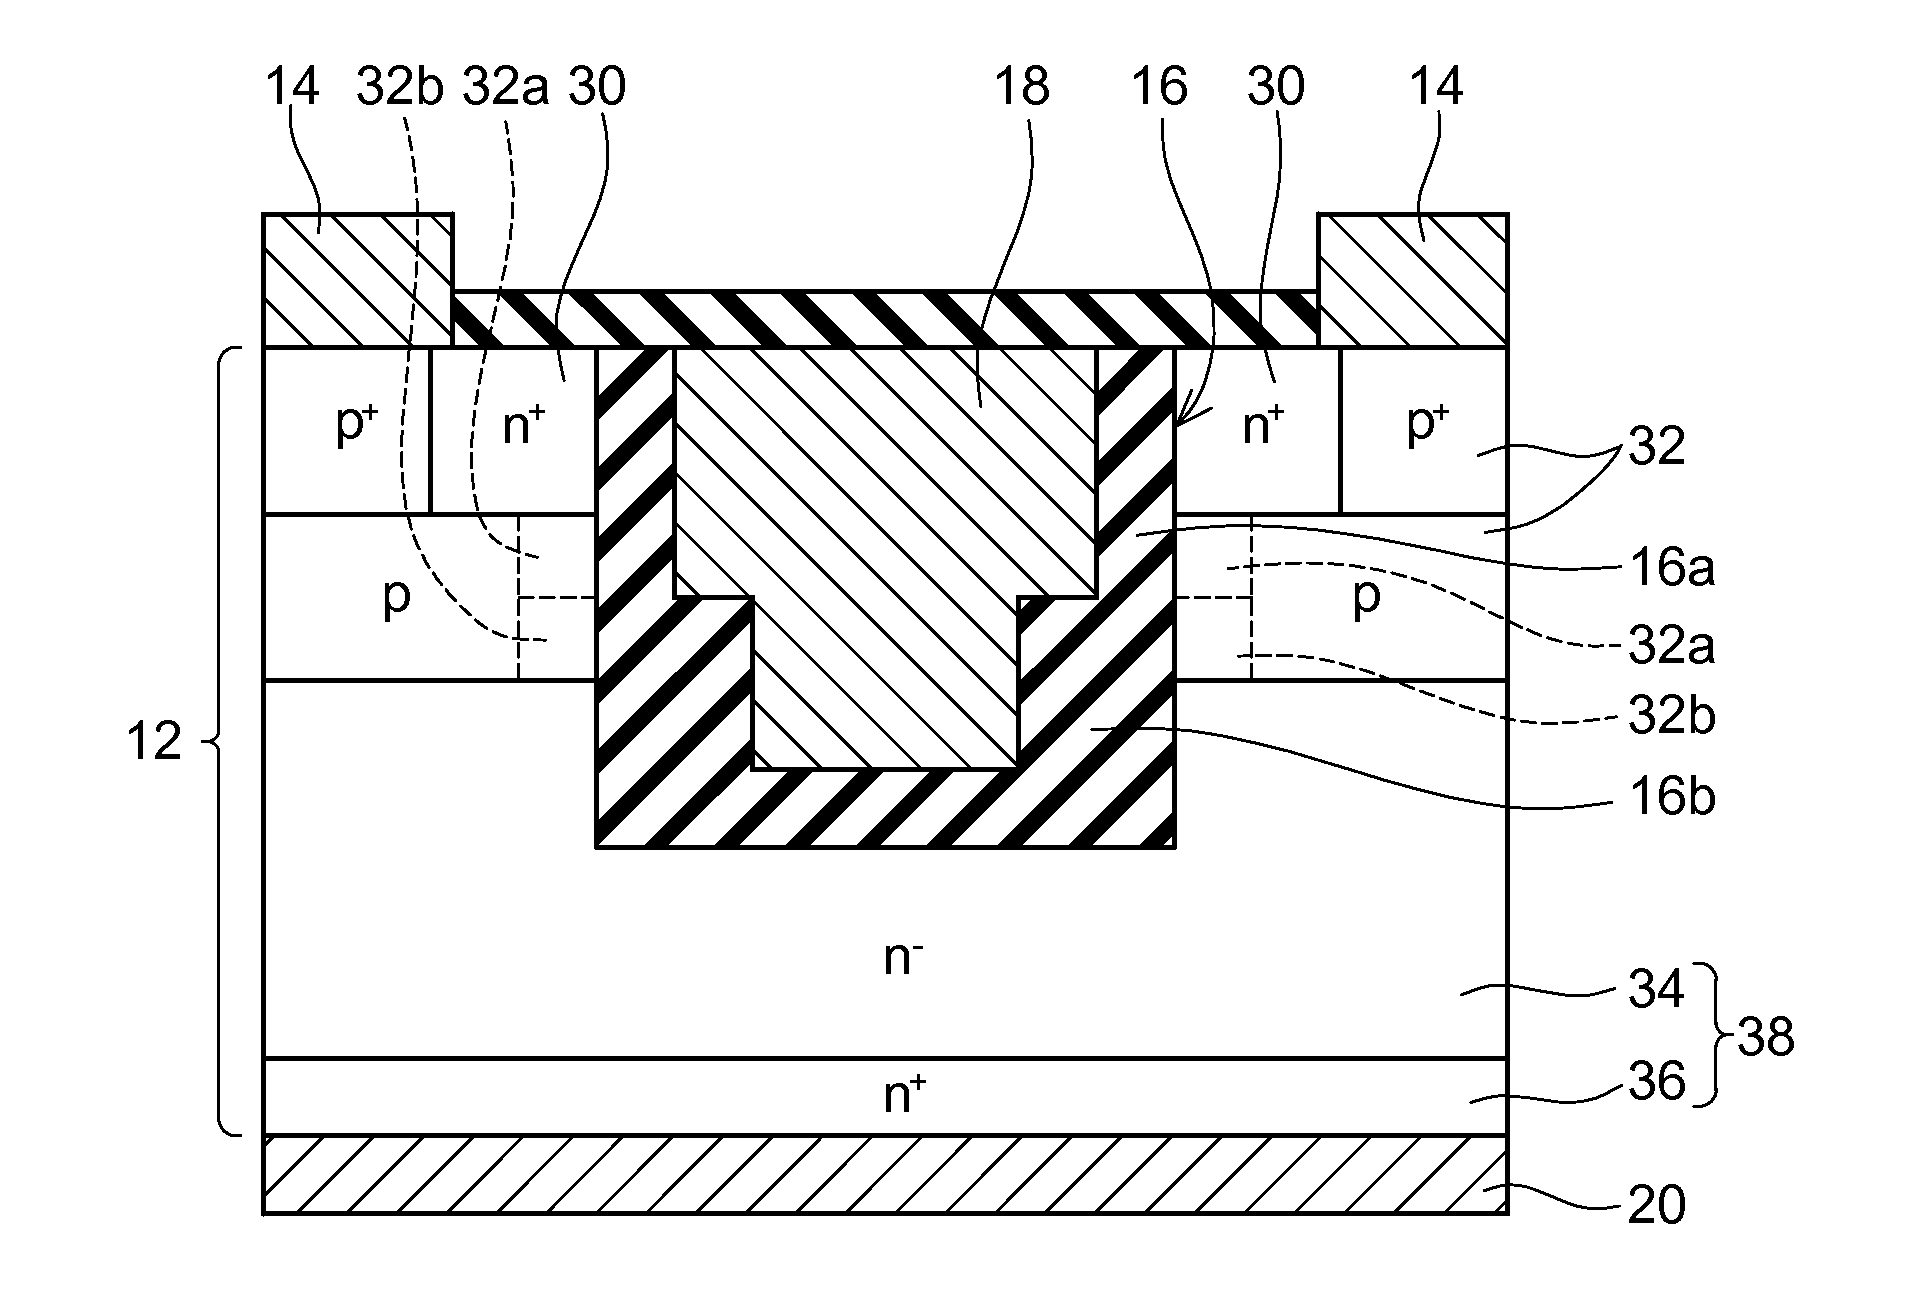 Insulated gate type switching device